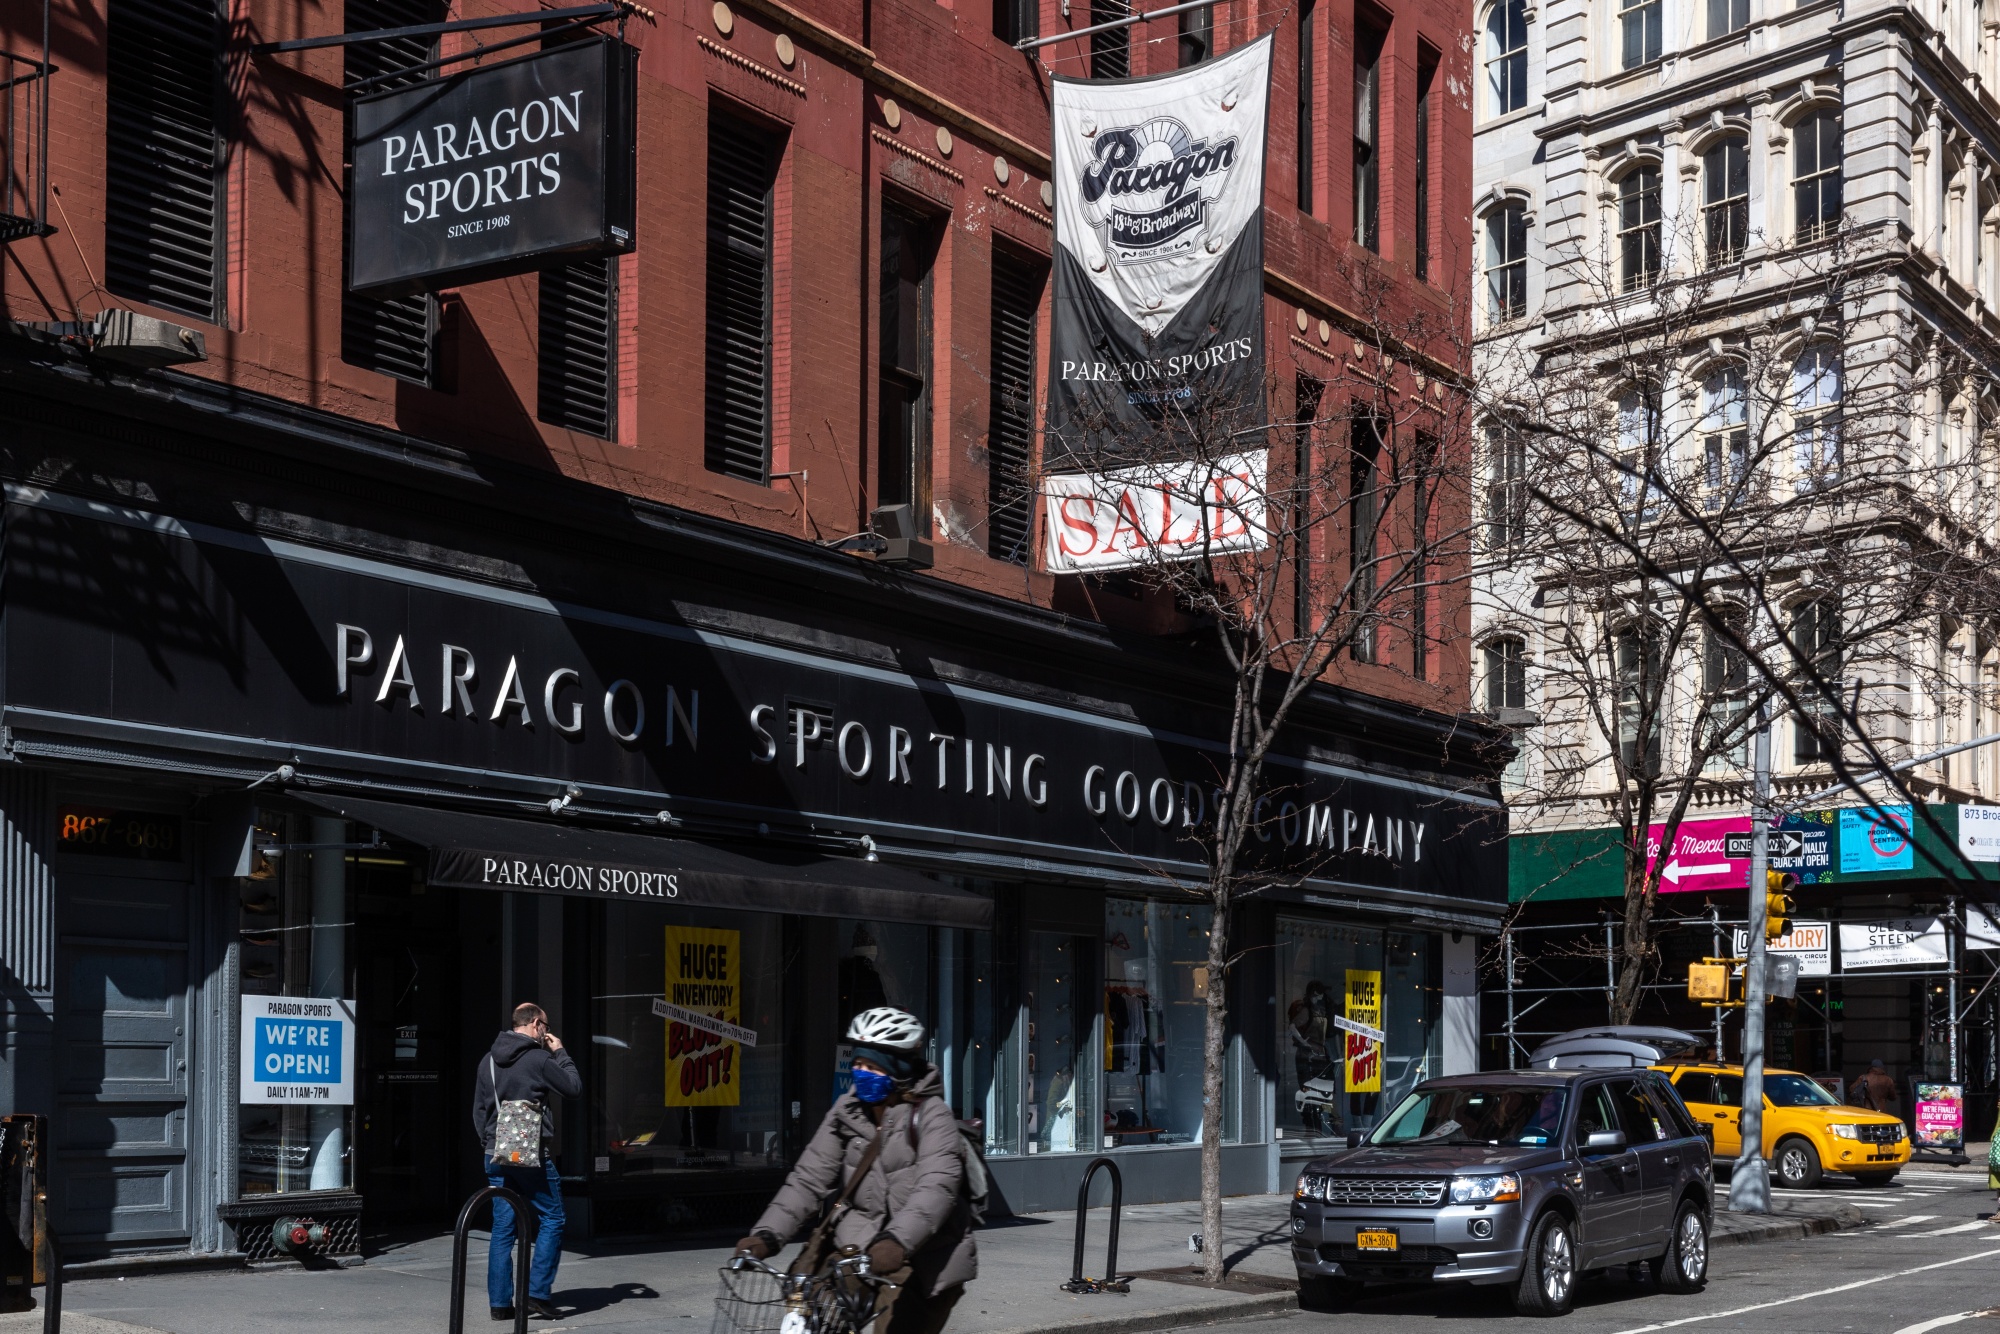 New York’s Paragon Sports Fights to Keep Going After Mass Layoff